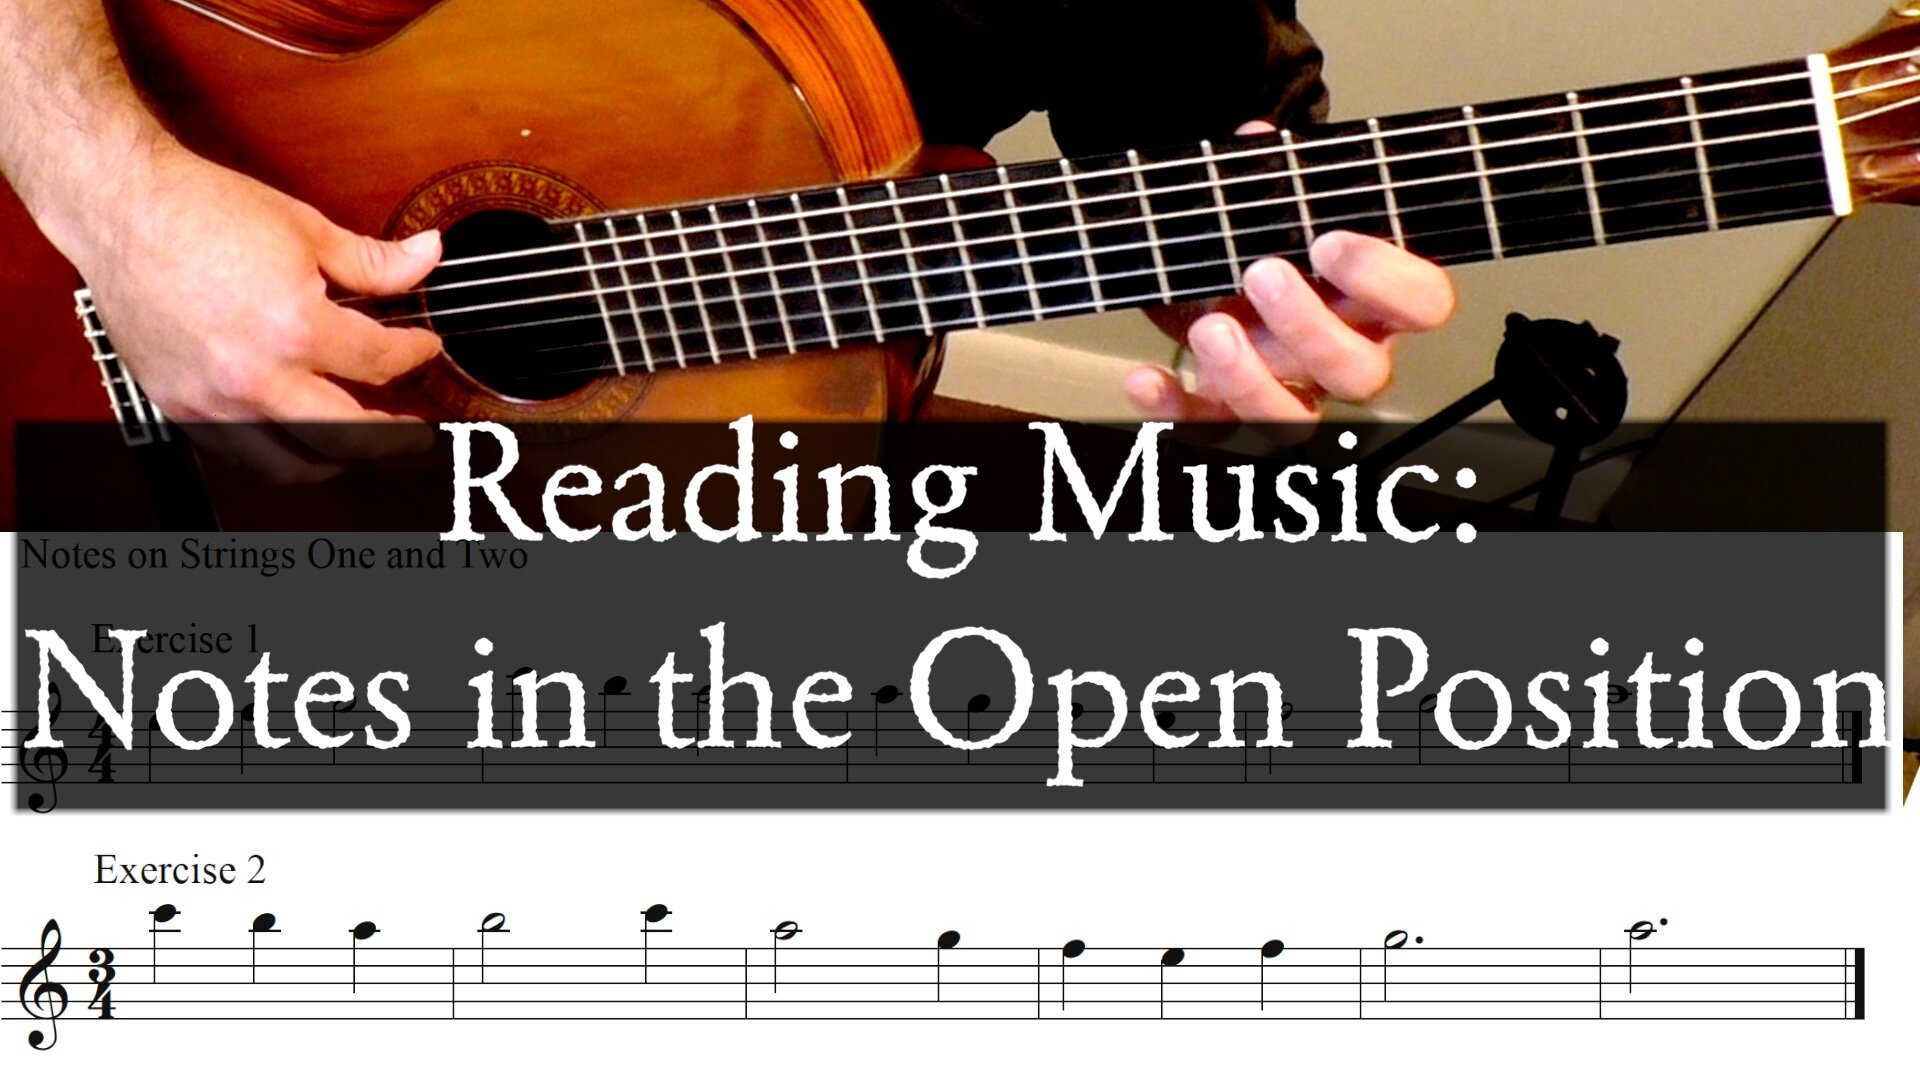 Reading Music: Open Position